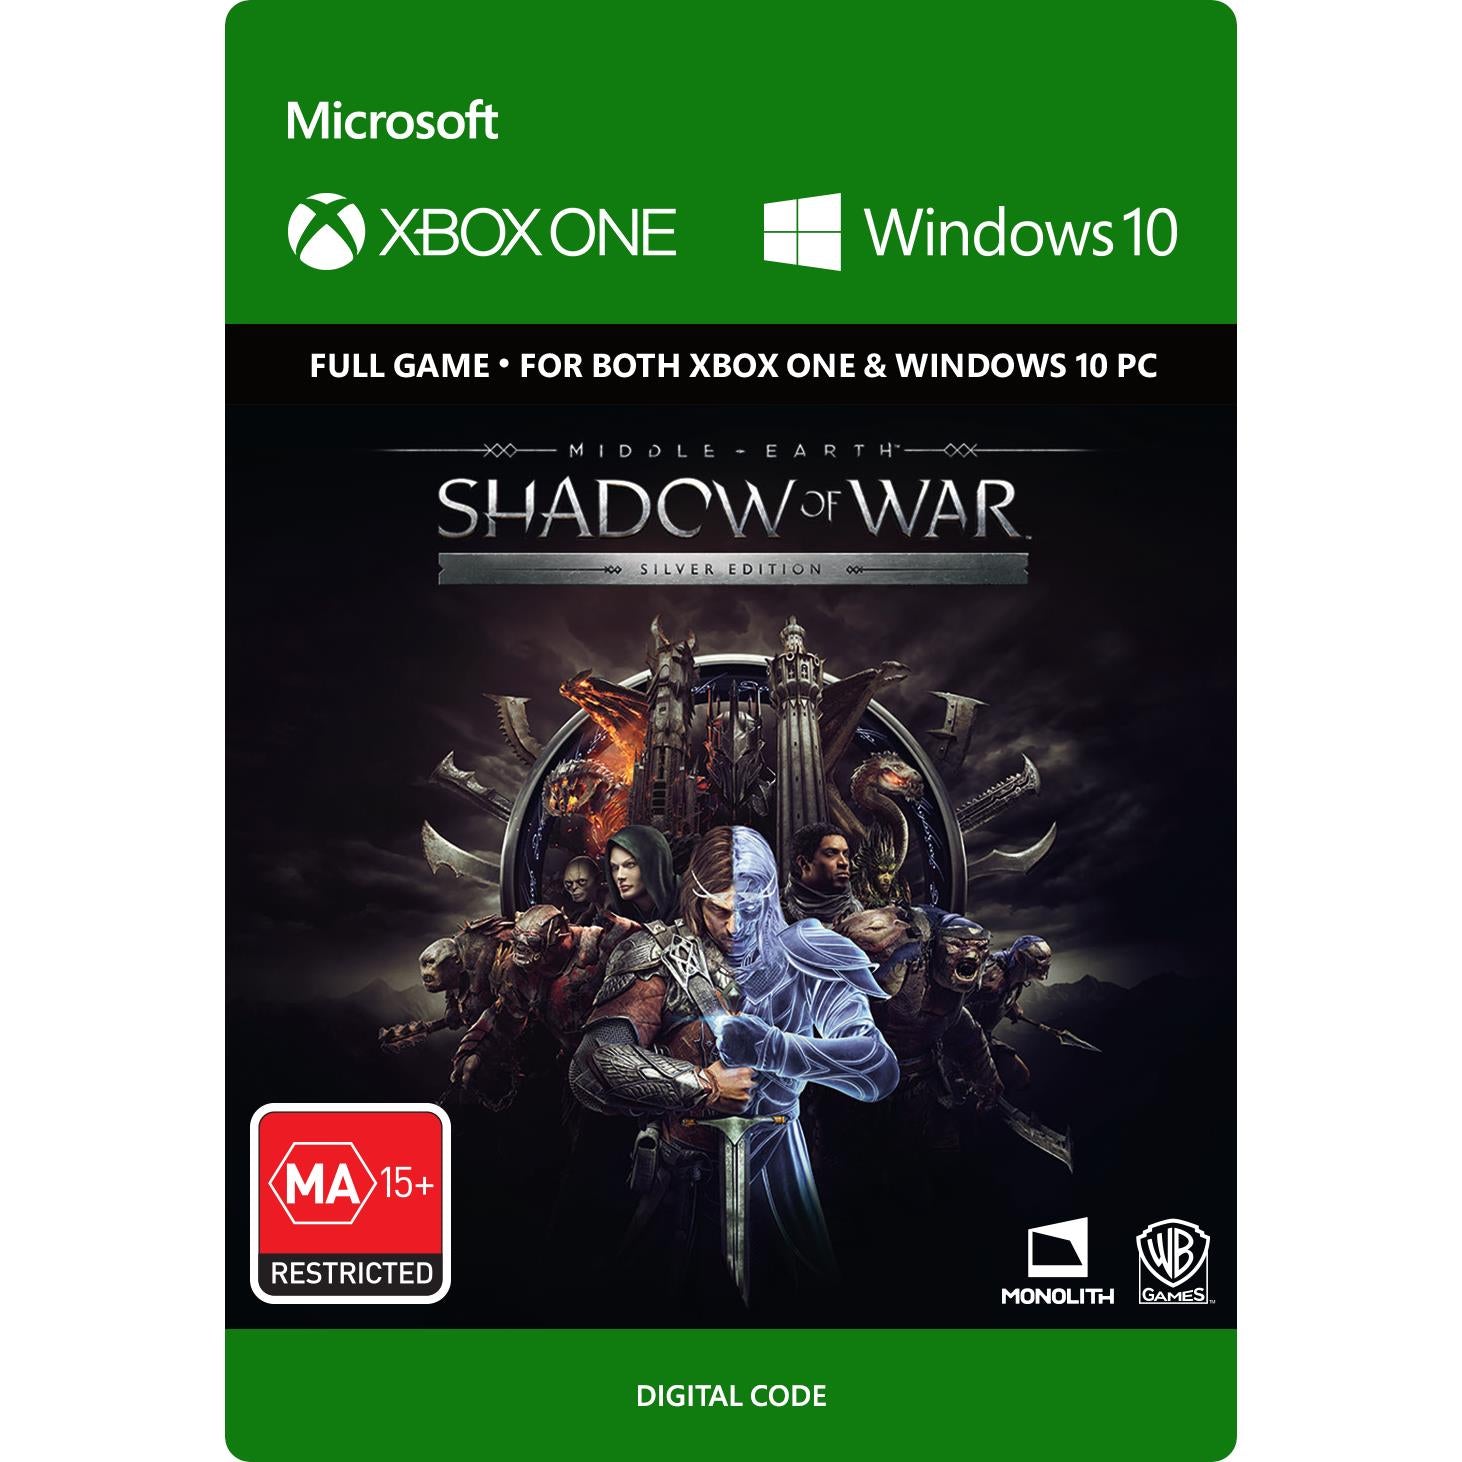 middle-earth: shadow of war silver edition (digital download)